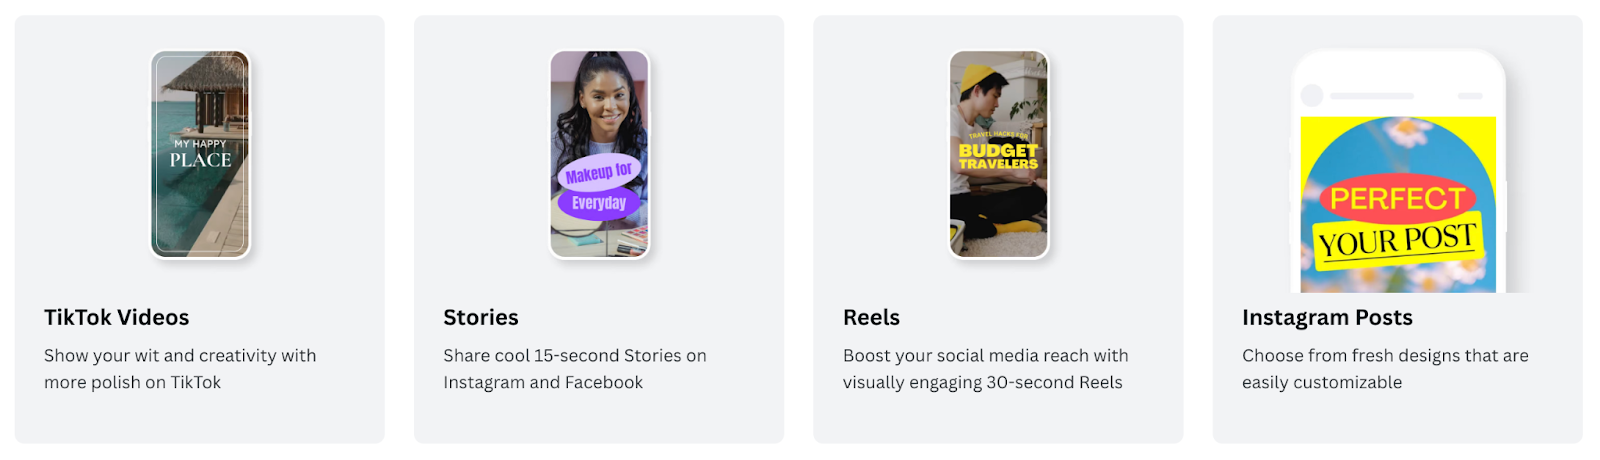 Screenshot of Canva showing options for TikTok vidoes, Stories, Reels, and Instagram Posts.